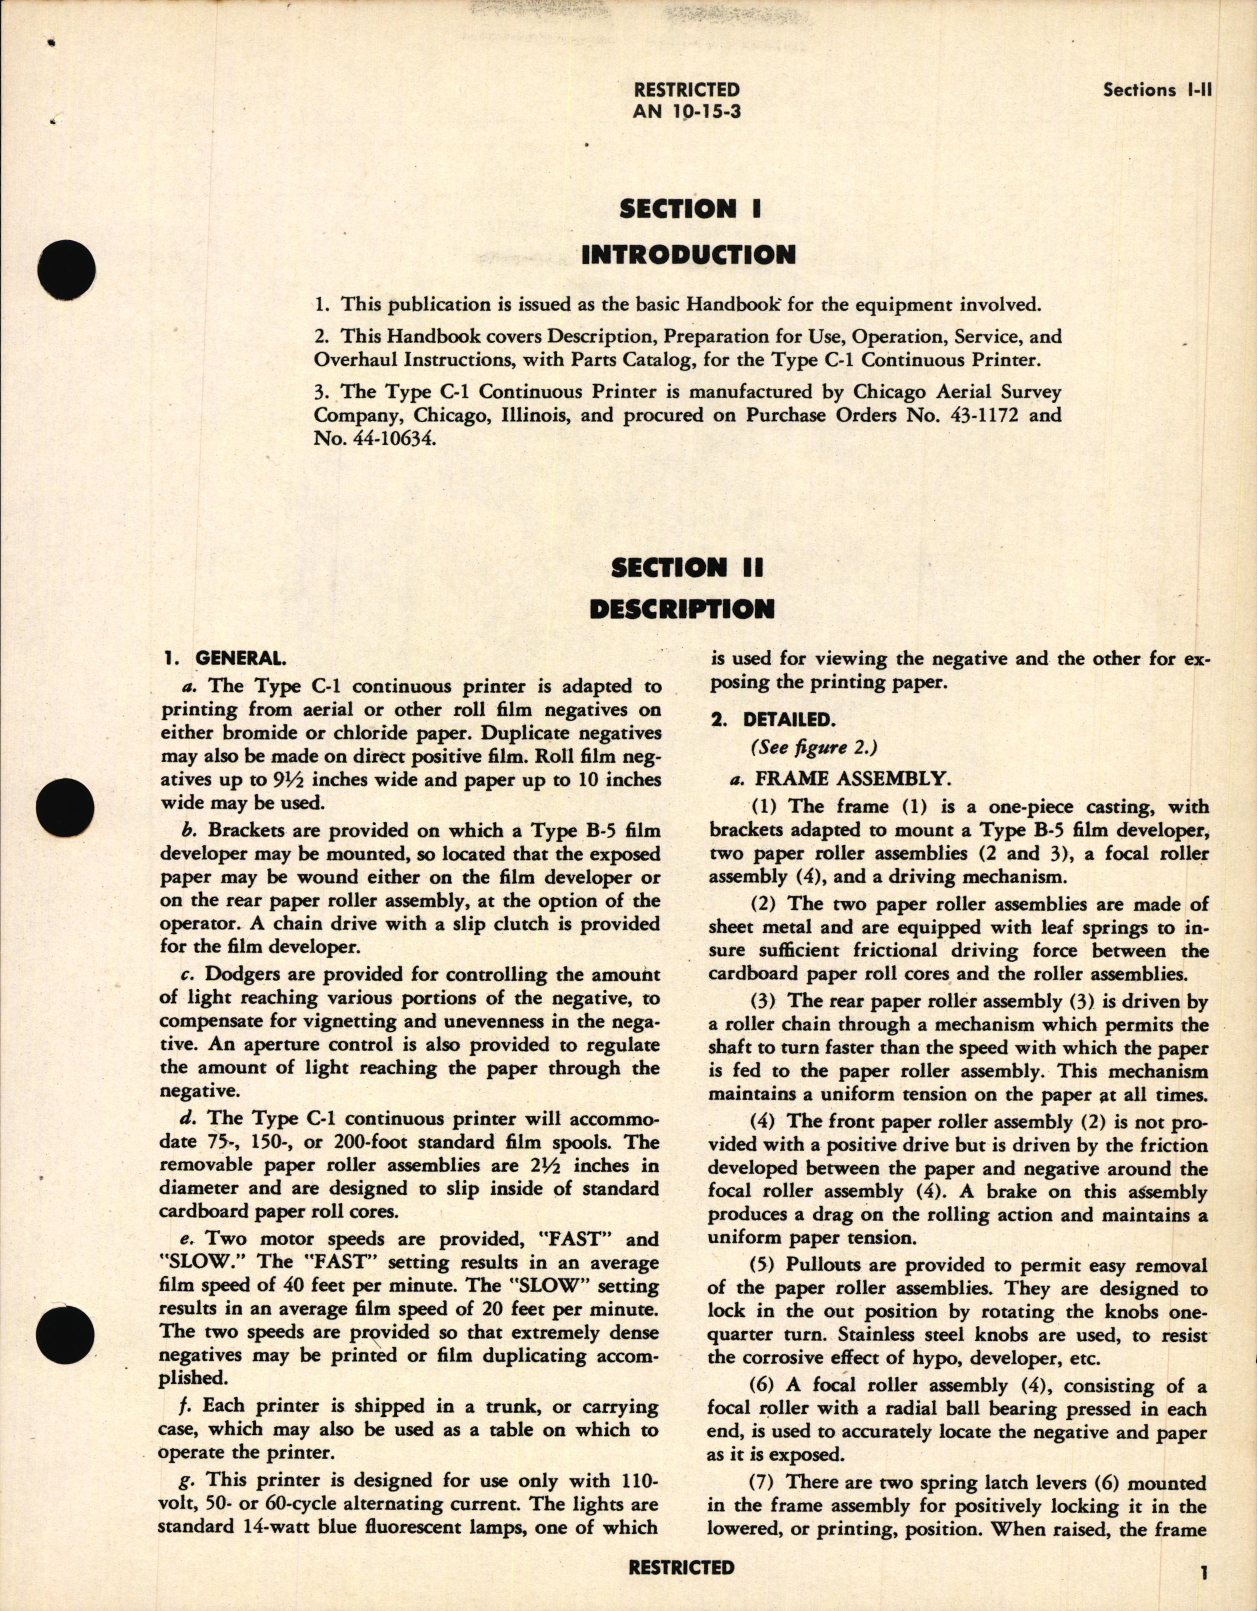 Sample page 5 from AirCorps Library document: Handbook of Instructions with Parts Catalog for Type C-1 Continuous Printer